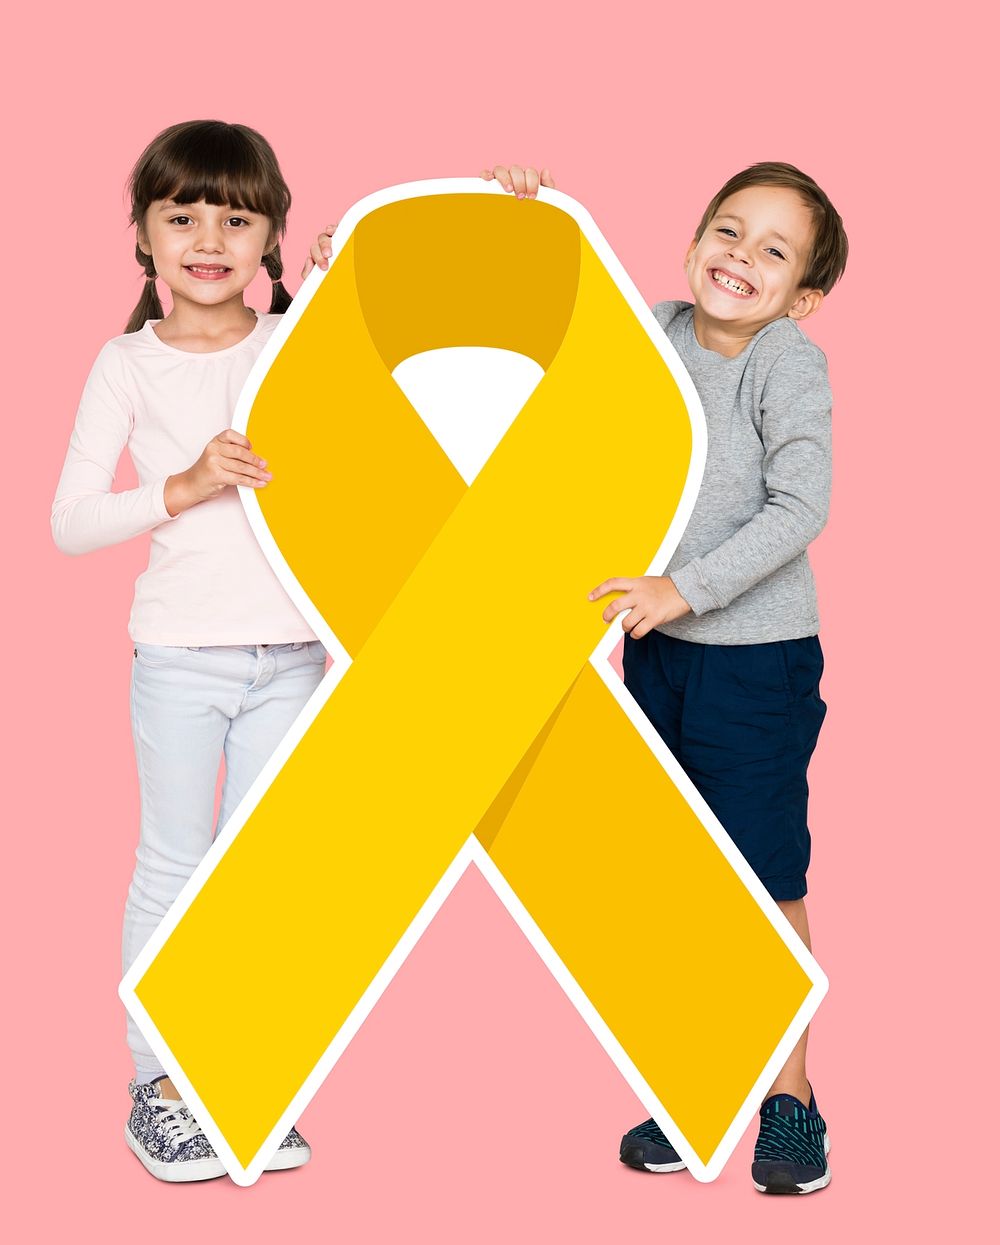 Kids holding a golden ribbon supporting childhood cancer awareness